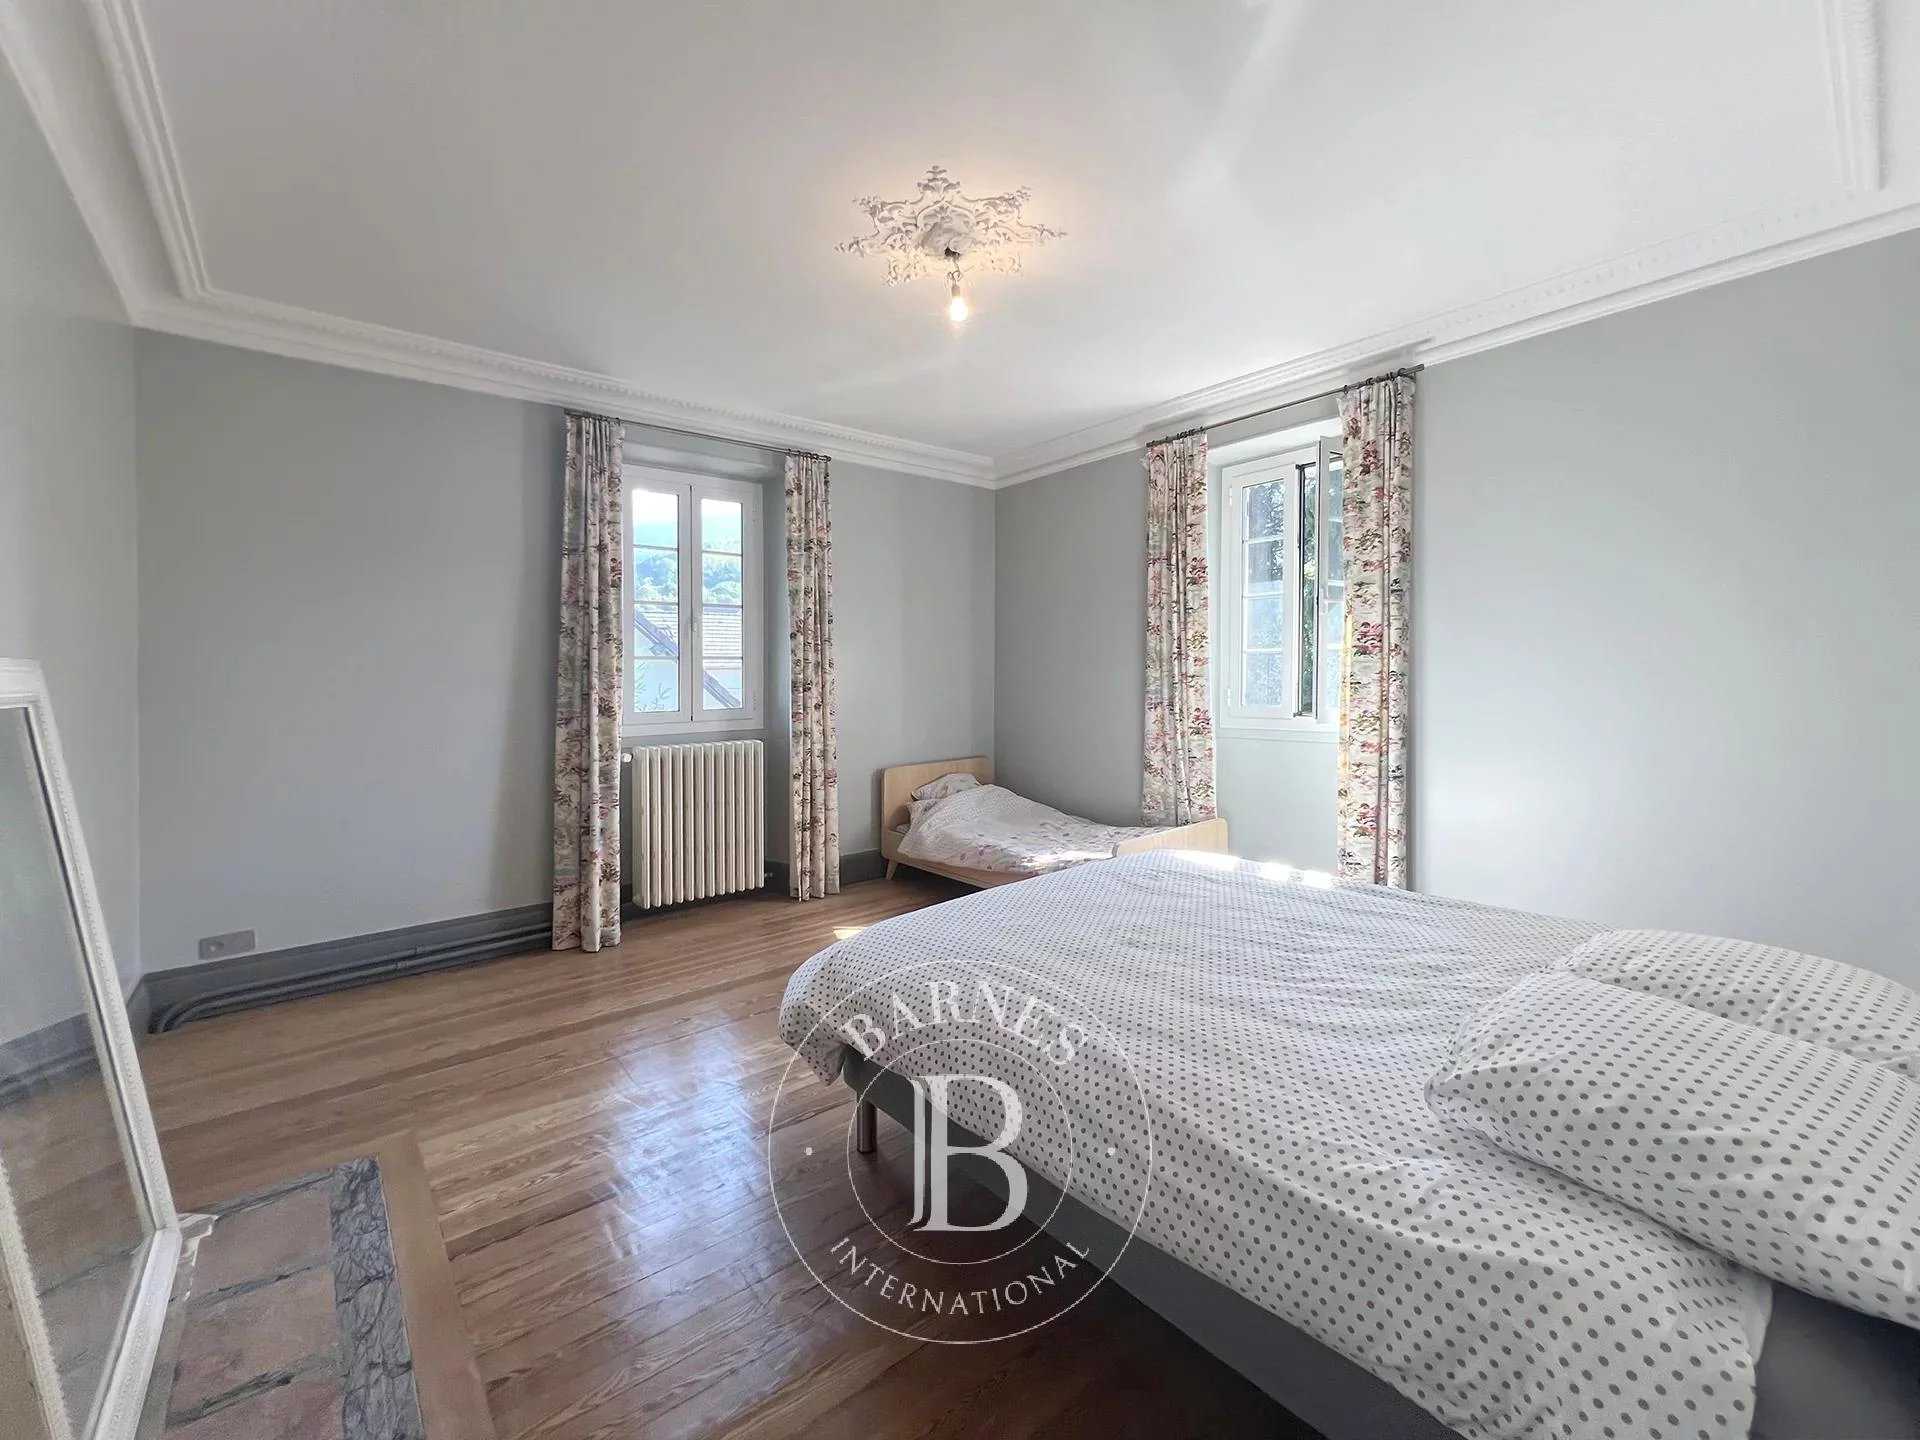 Chambéry  - House 9 Bedrooms